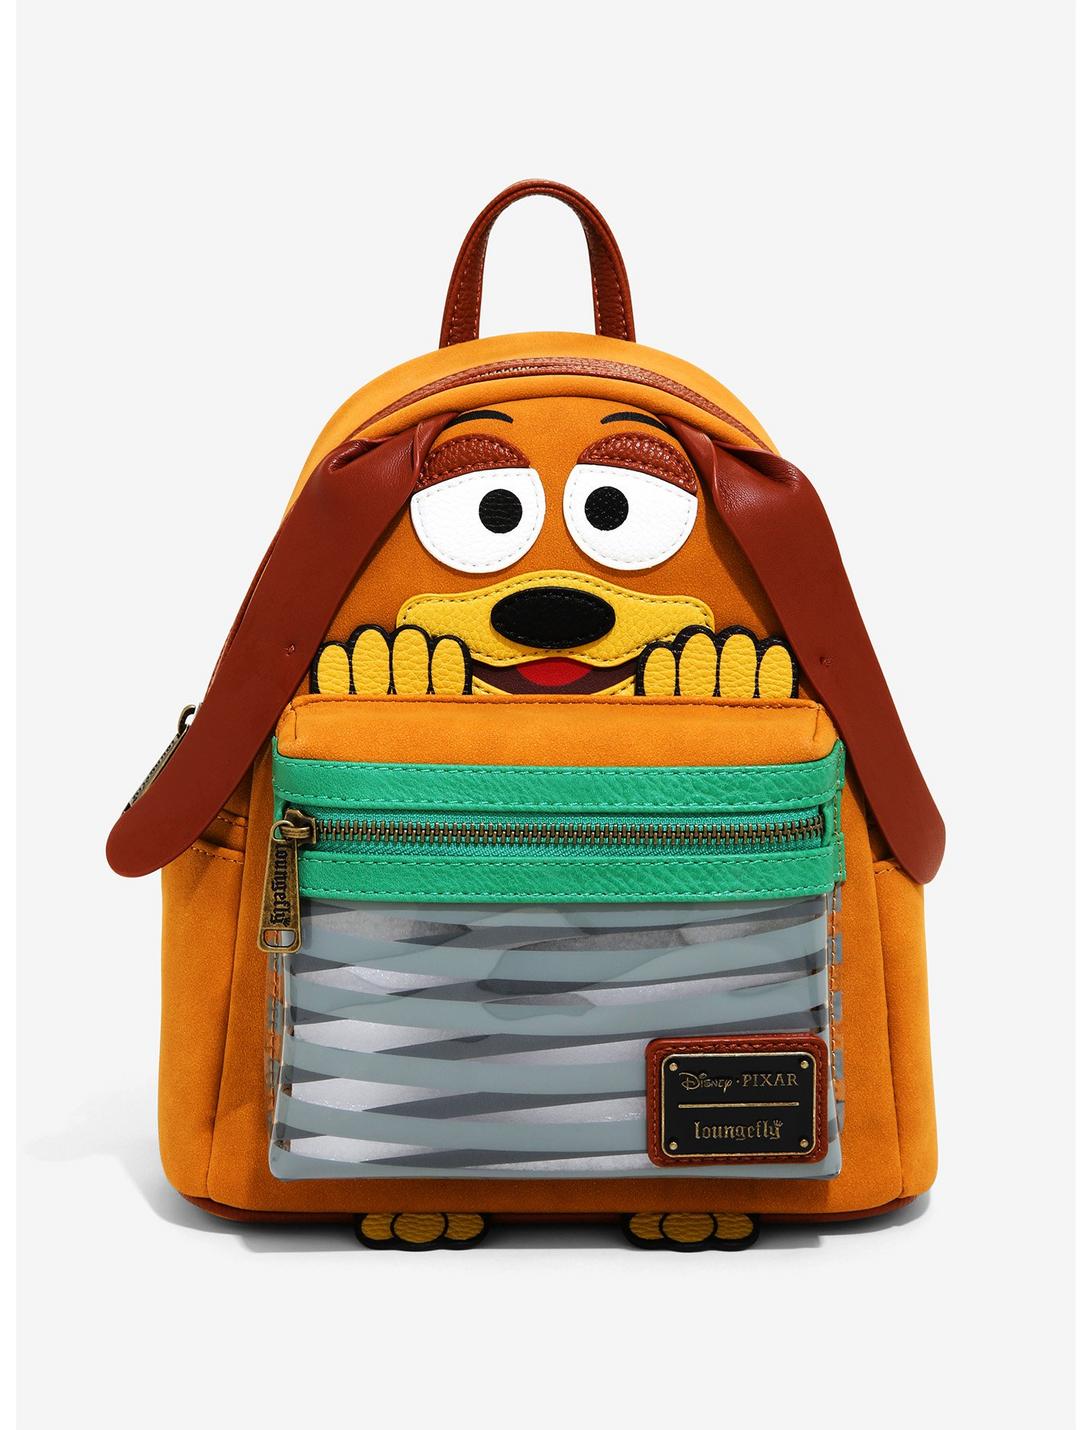 Loungefly Disney Pixar Toy Story Slinky Dog Mini Backpack - 2019 Summer Convention Exclusive, , hi-res